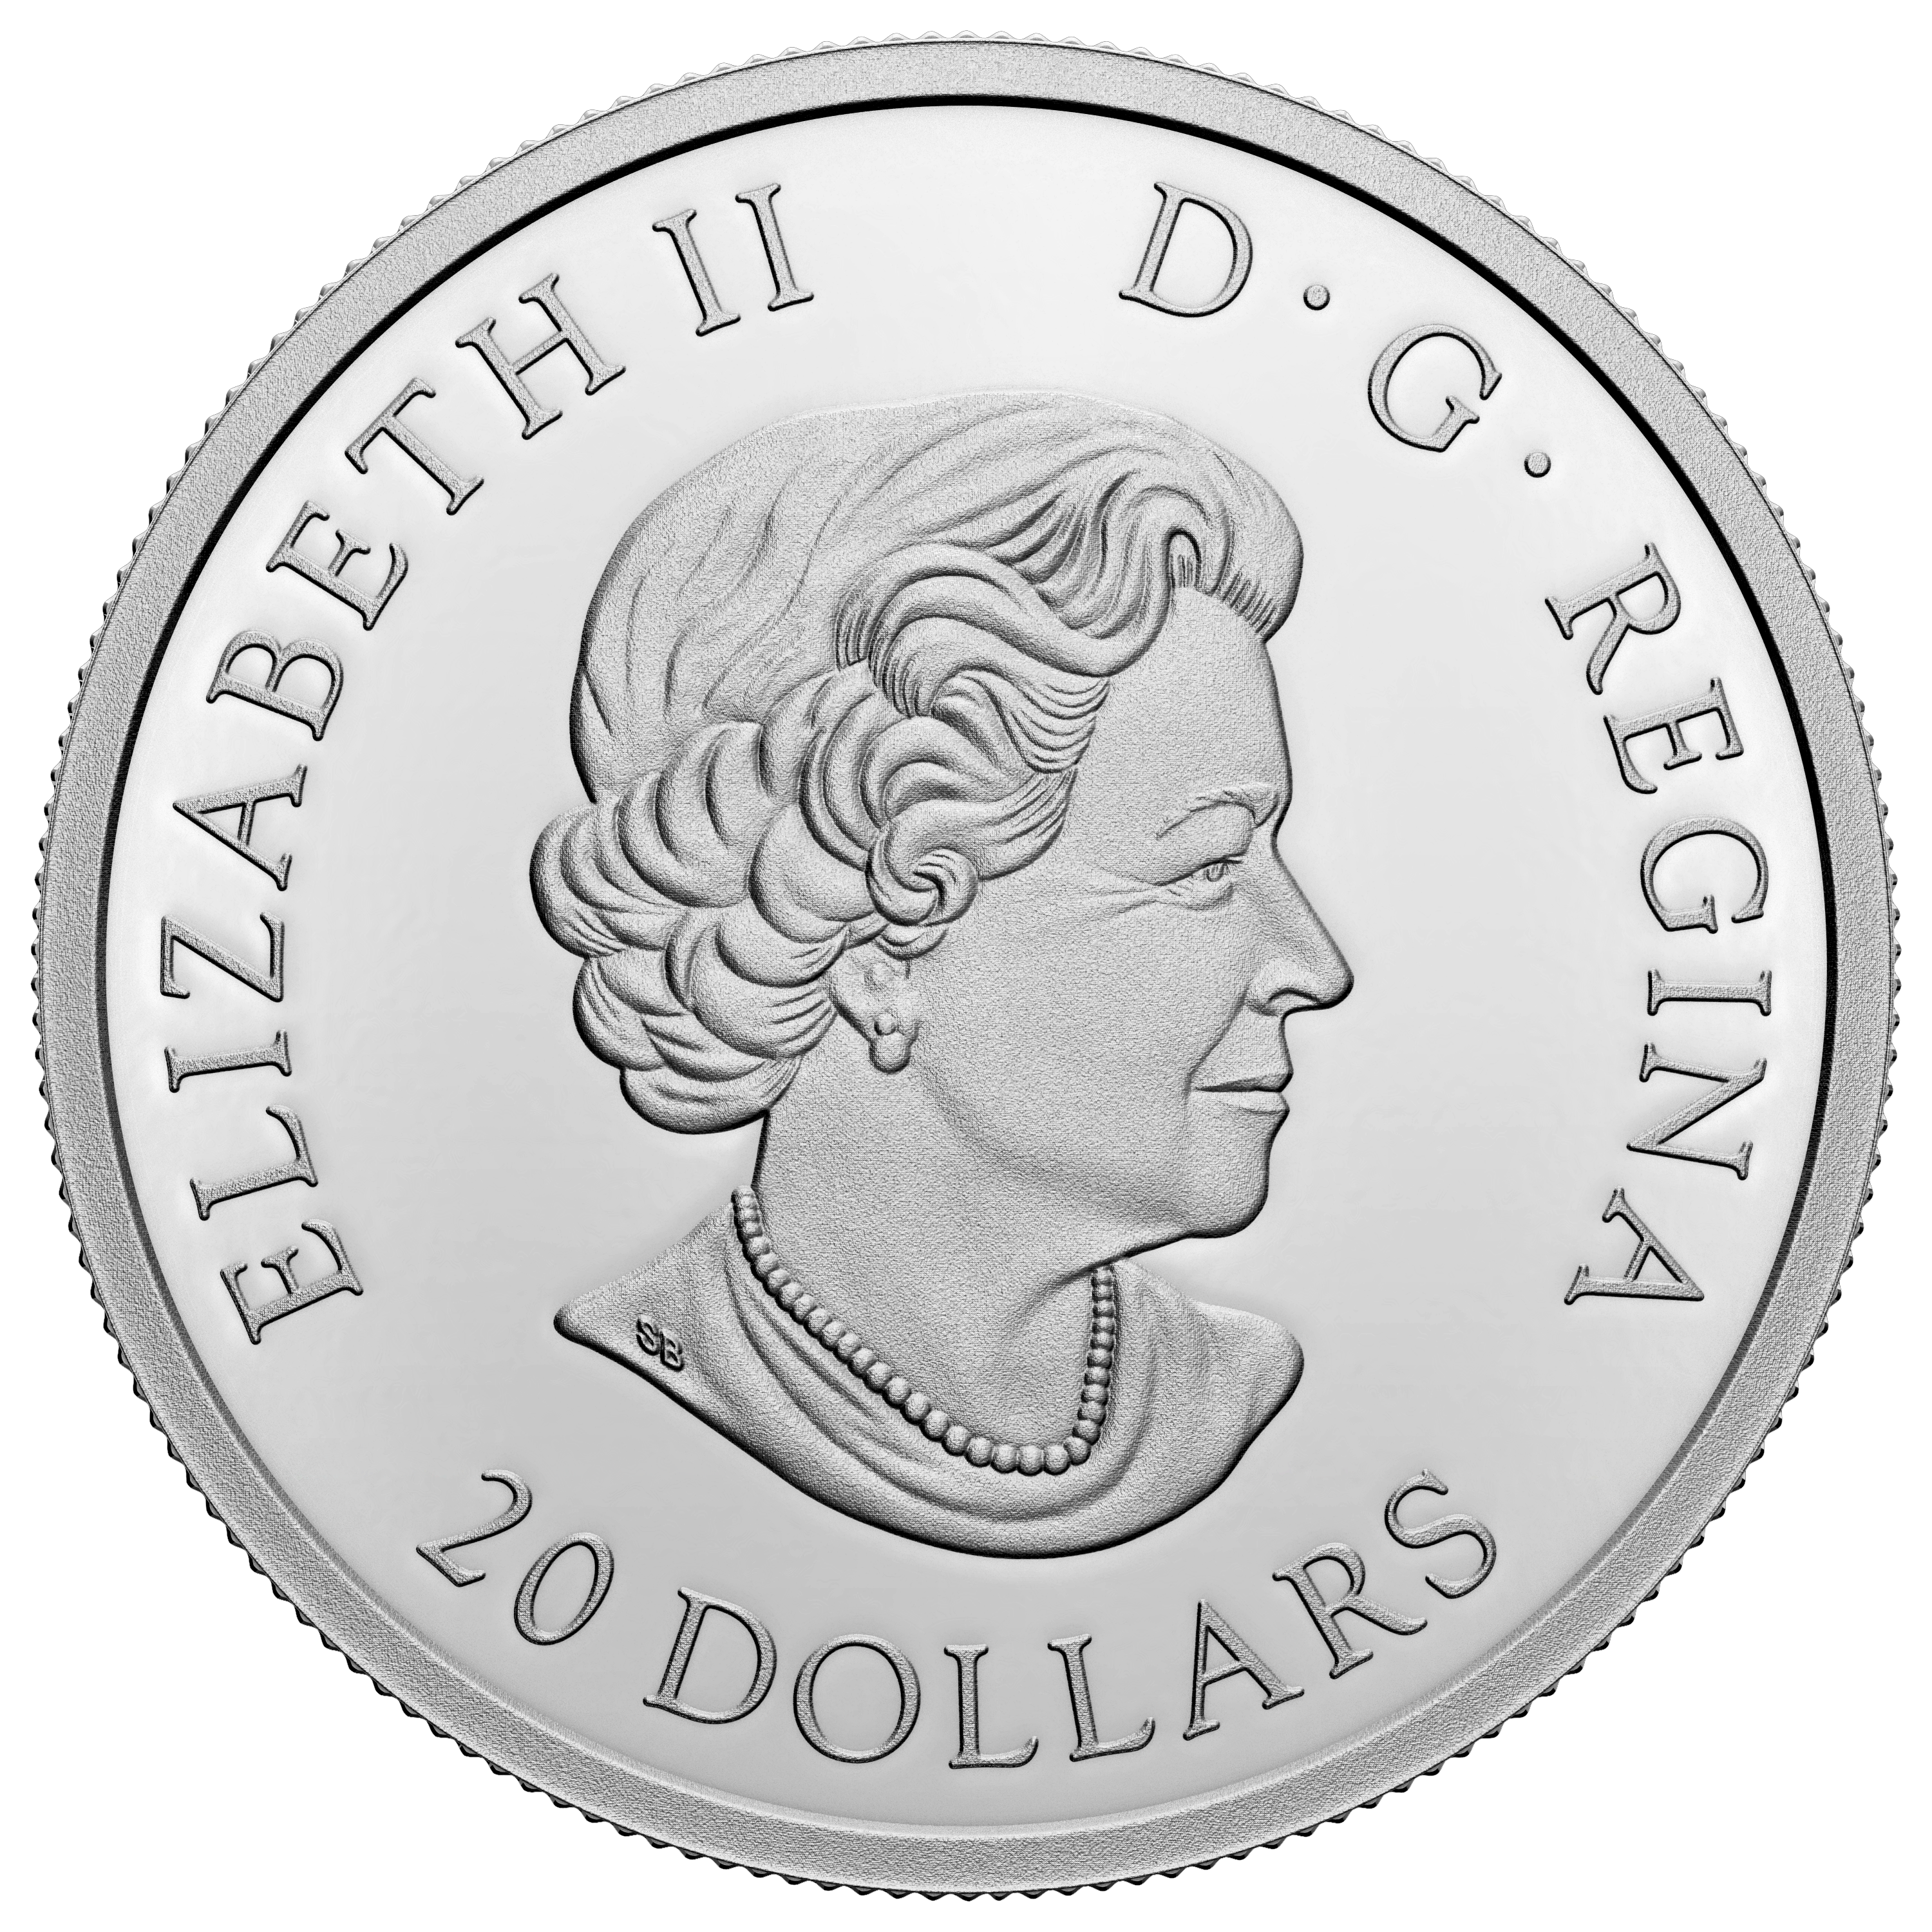 The Platinum Jubilee of Her Majesty Queen Elizabeth II Two-Coin Set 2022